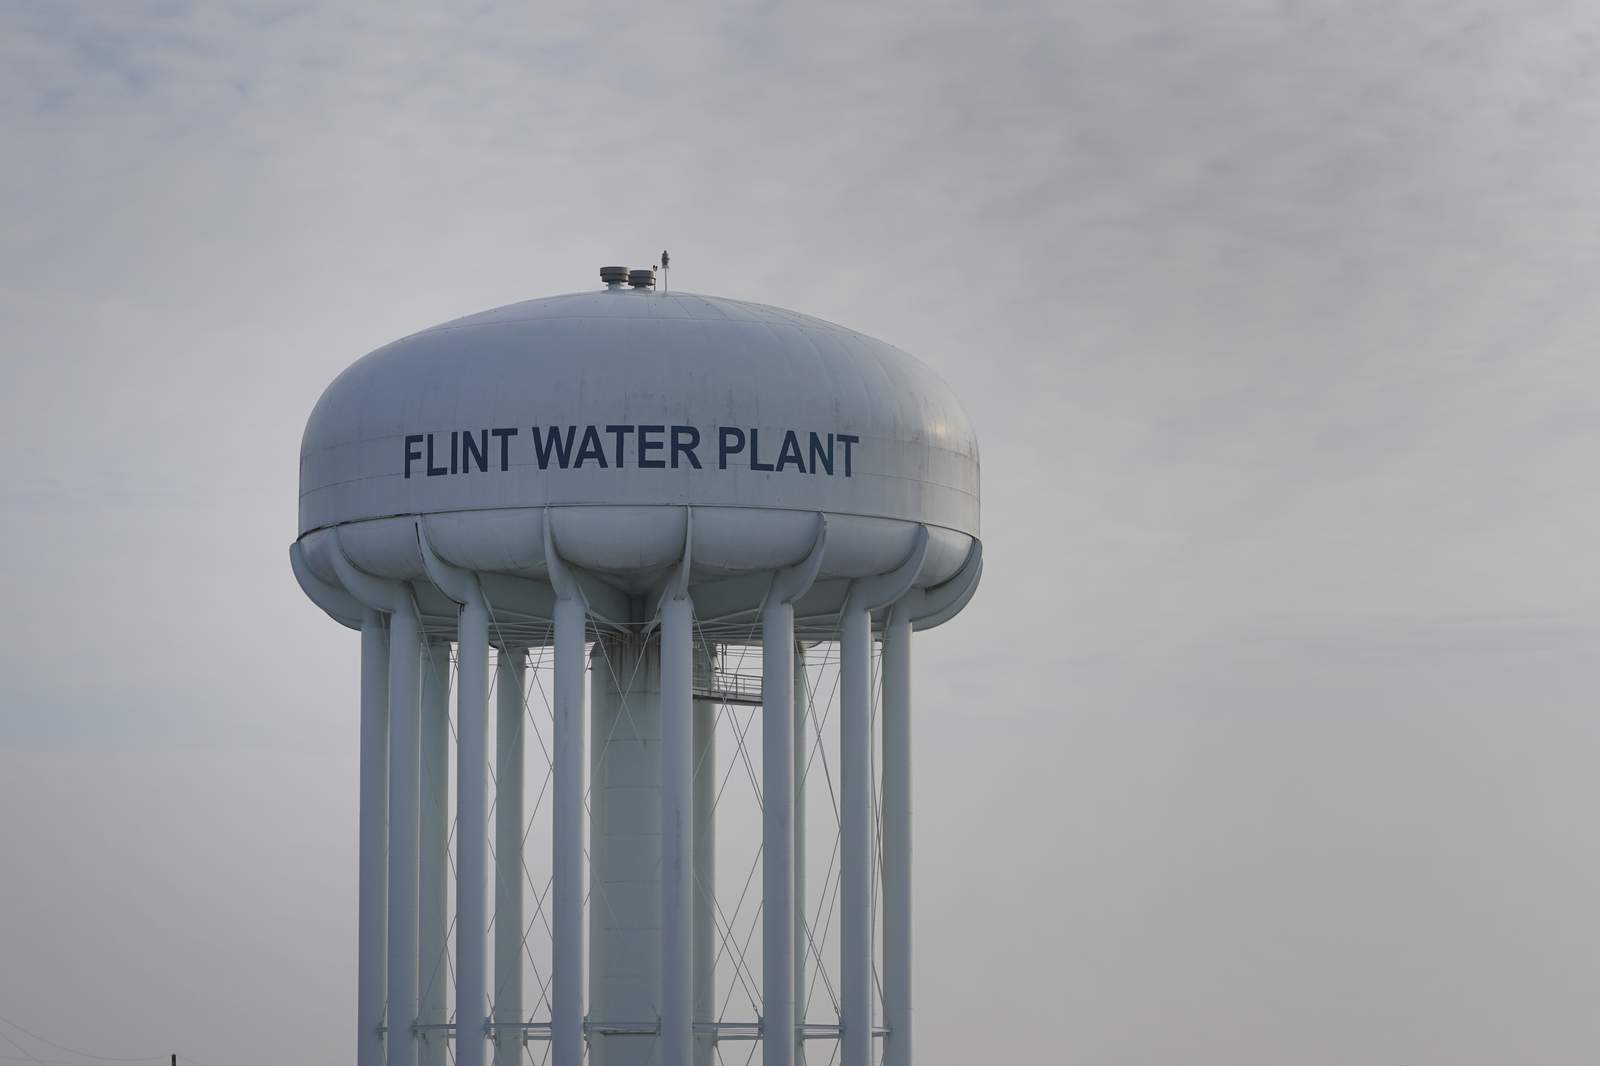 Morning Briefing Jan. 14, 2021: Flint water crisis prosecution team to announce findings from investigation; Snyder faces charges